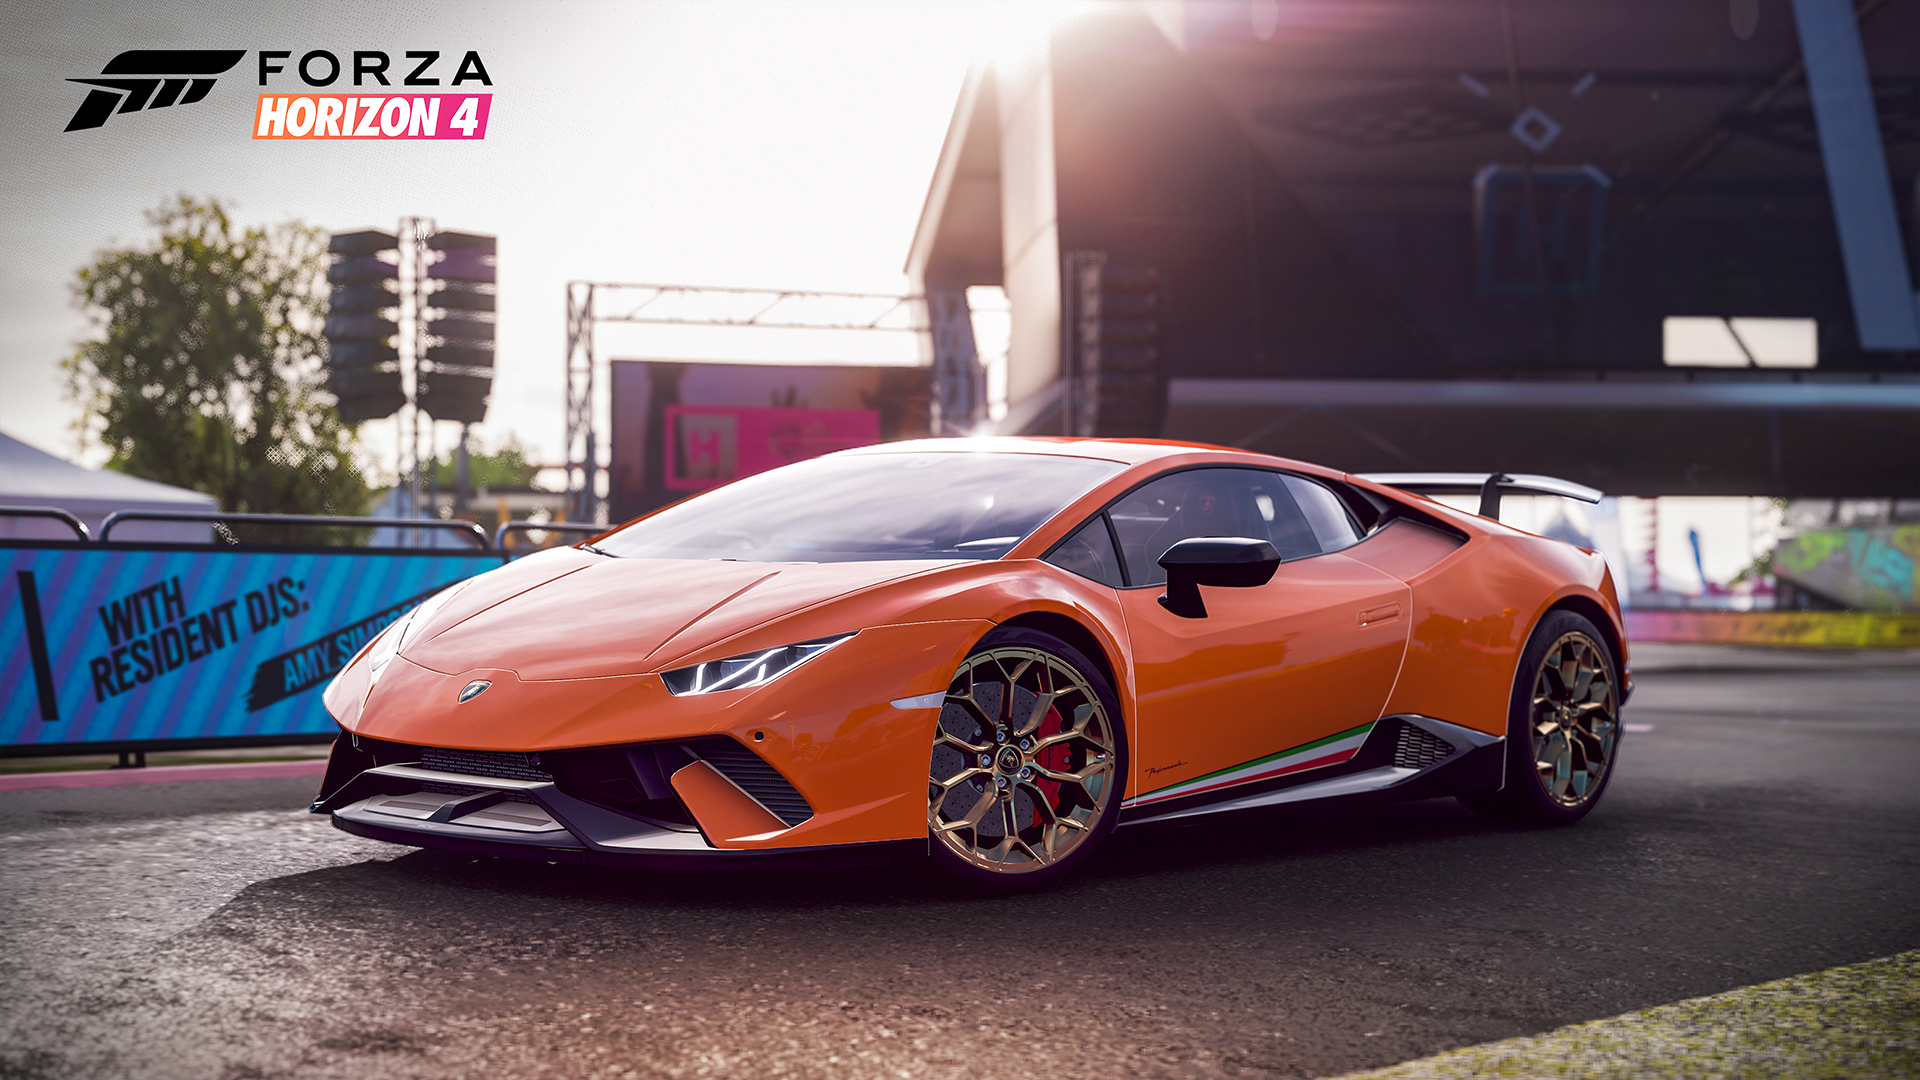 Forza Horizon 4 Series 14 Update Now Available: More McLarens, VW